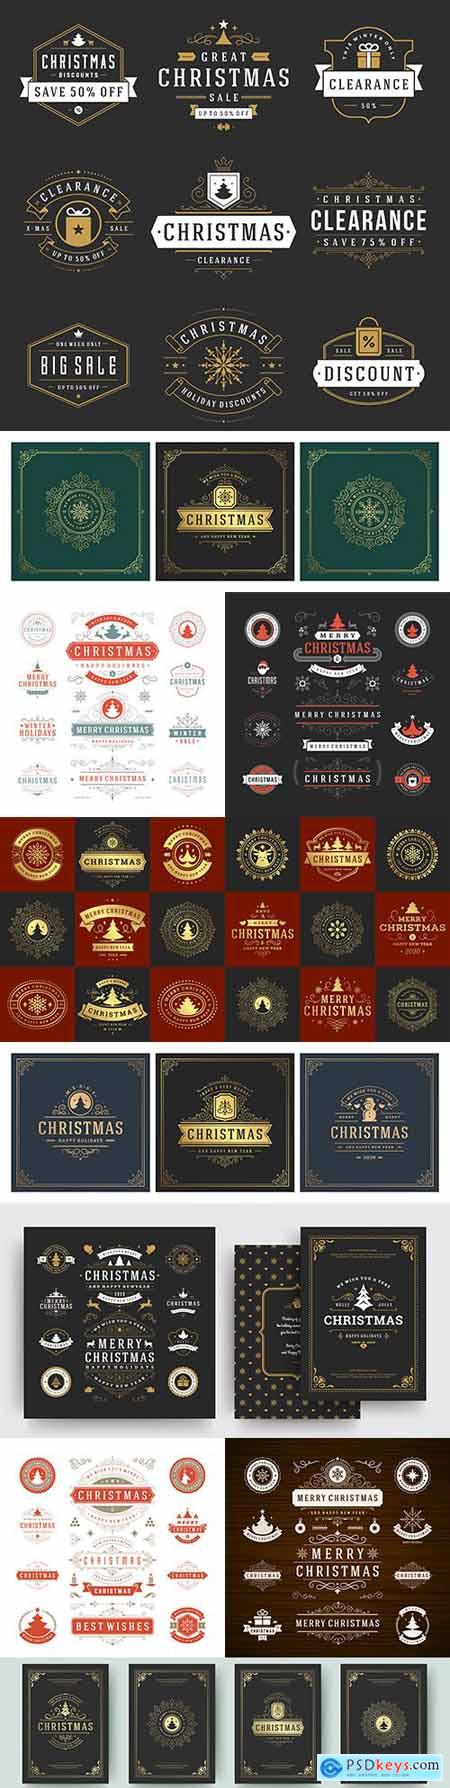 Christmas labels and design elements for greeting card logos